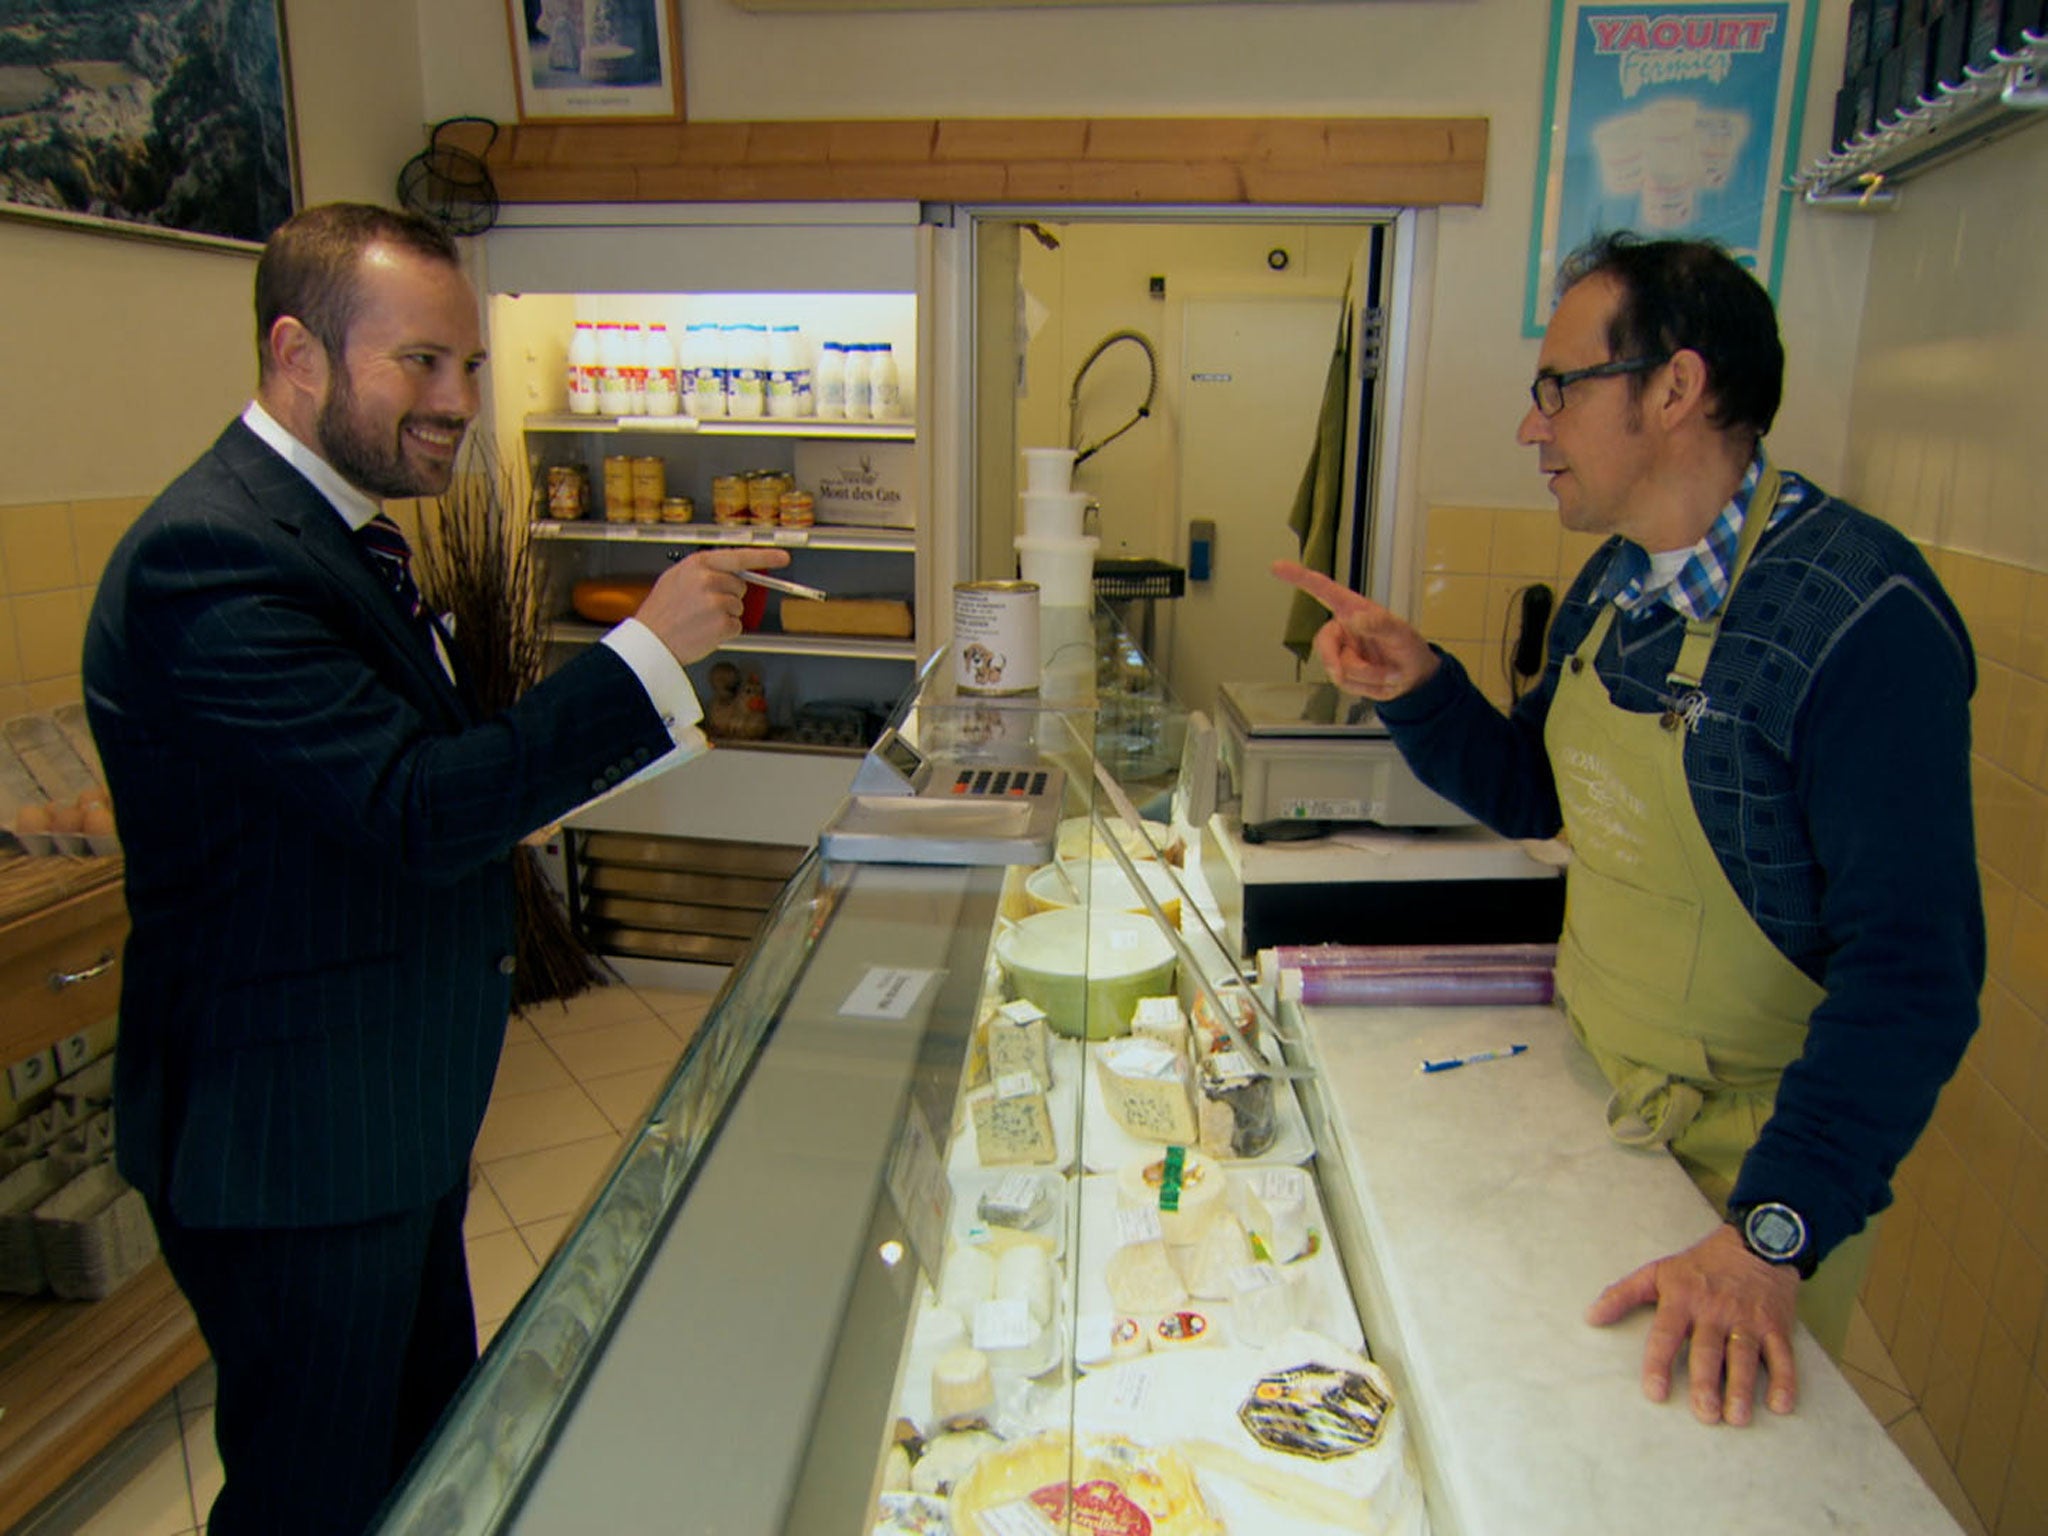 Meeting the locals: Richard Woods 'charms' a French shopkeeper